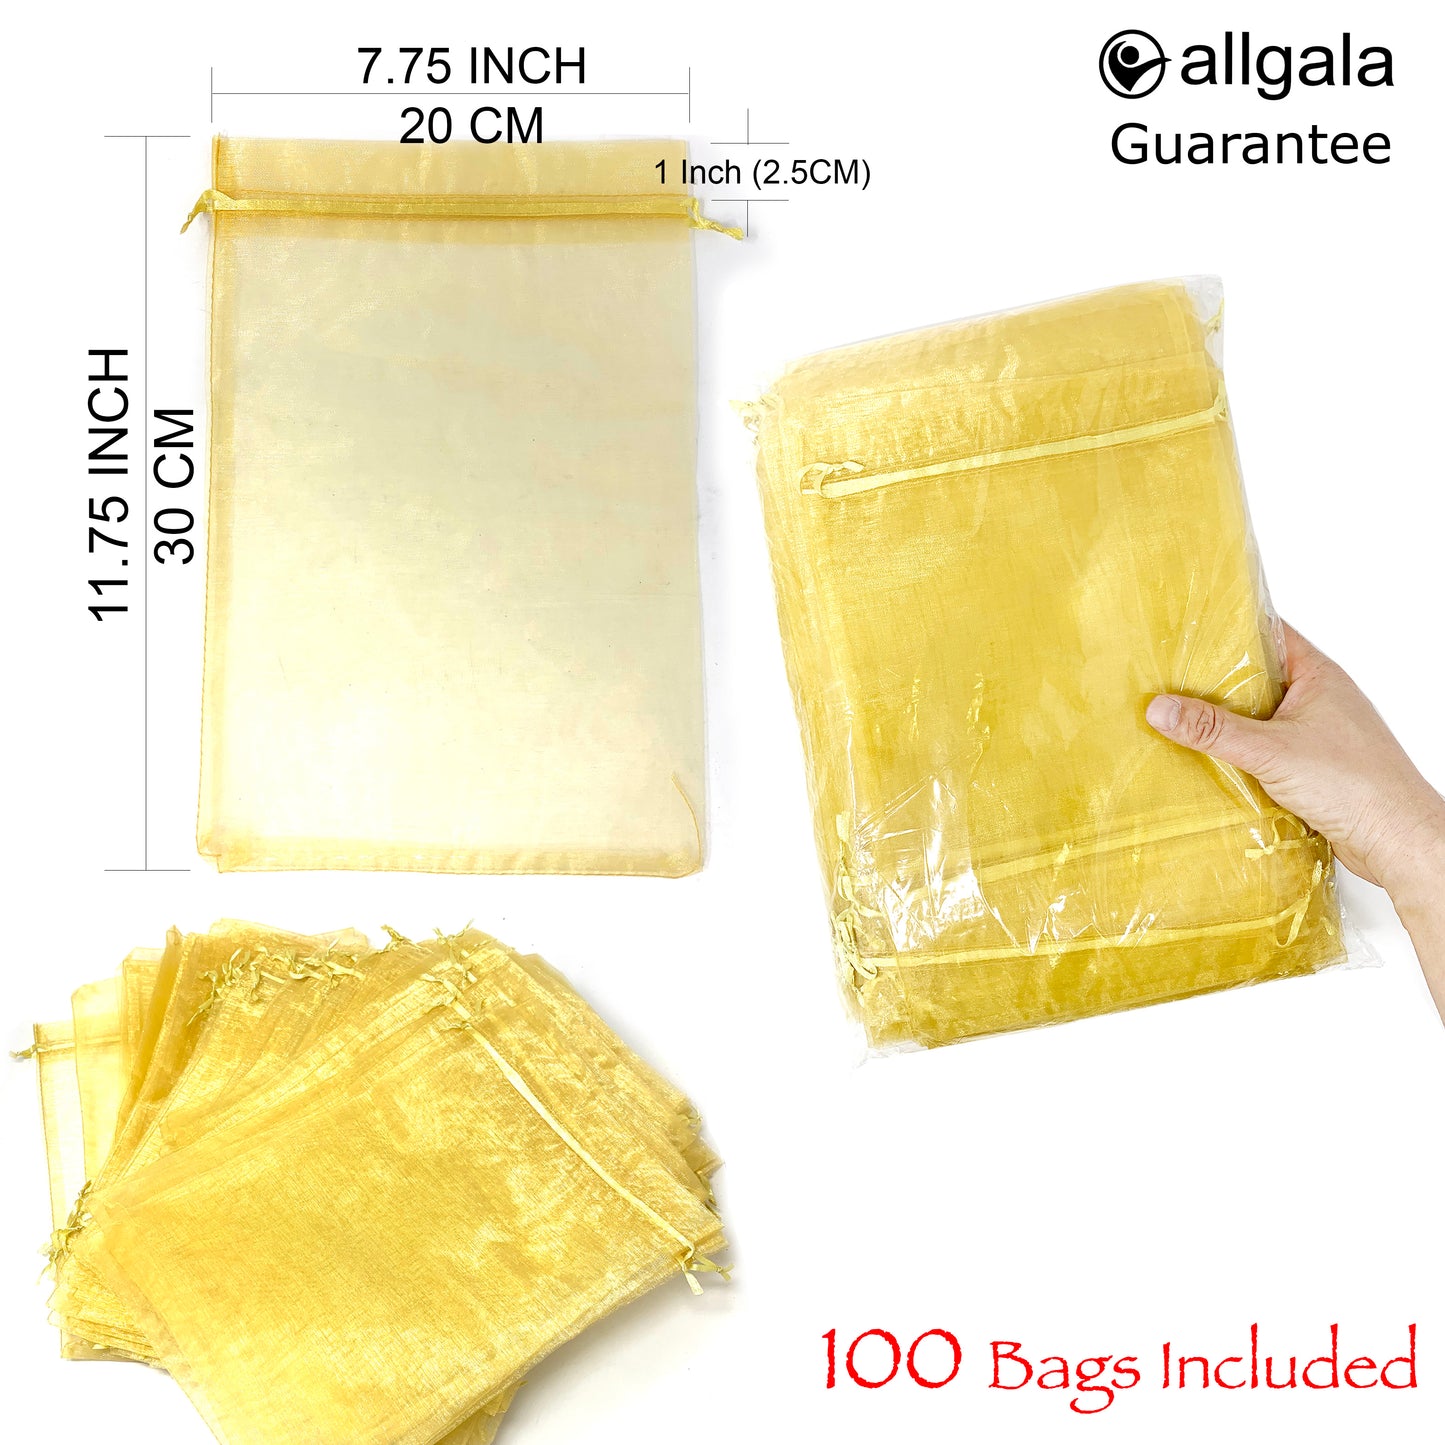 Allgala Organza Bags 100 Count Organza Sheer Gift Party Favor Bags with Drawstring-8x12 Inch